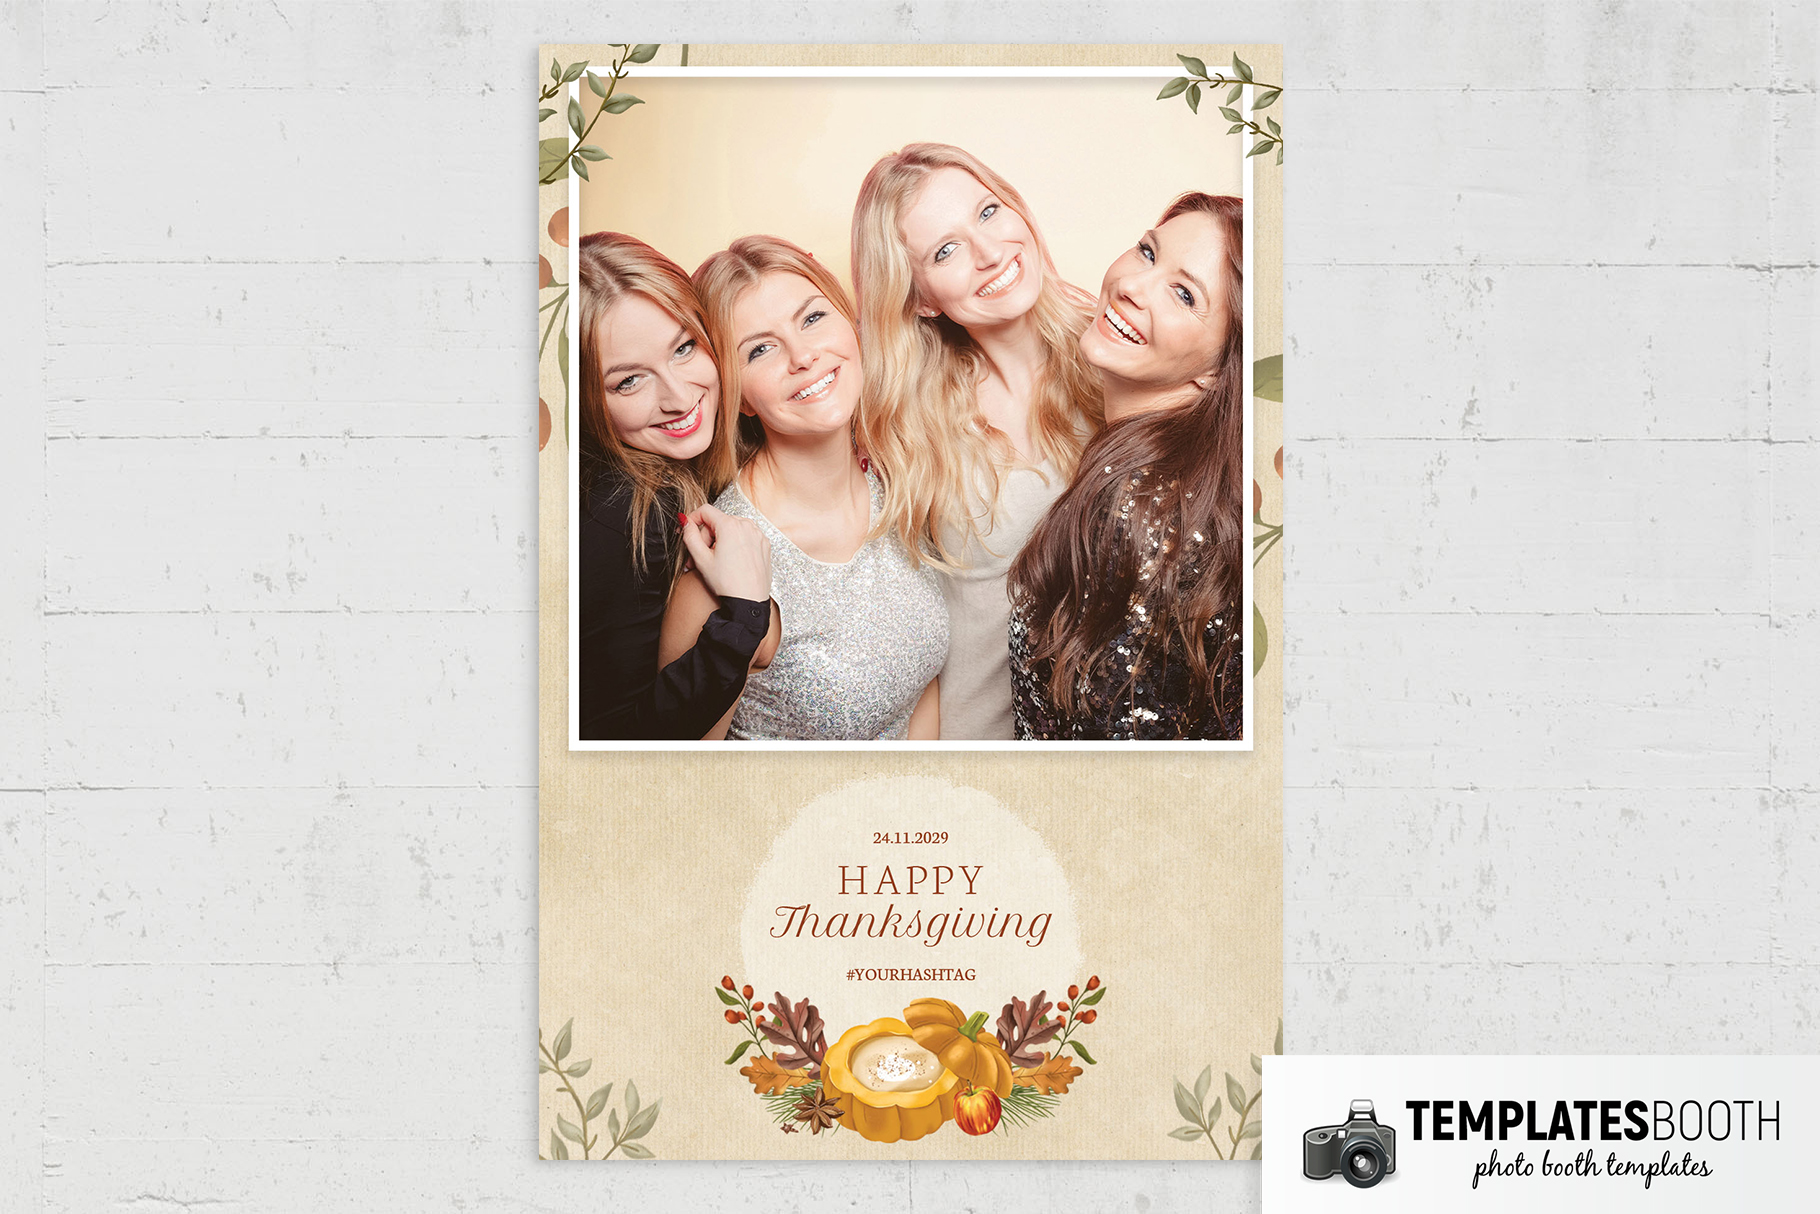 Happy Thanksgiving Photo Booth Template (PSD Format)